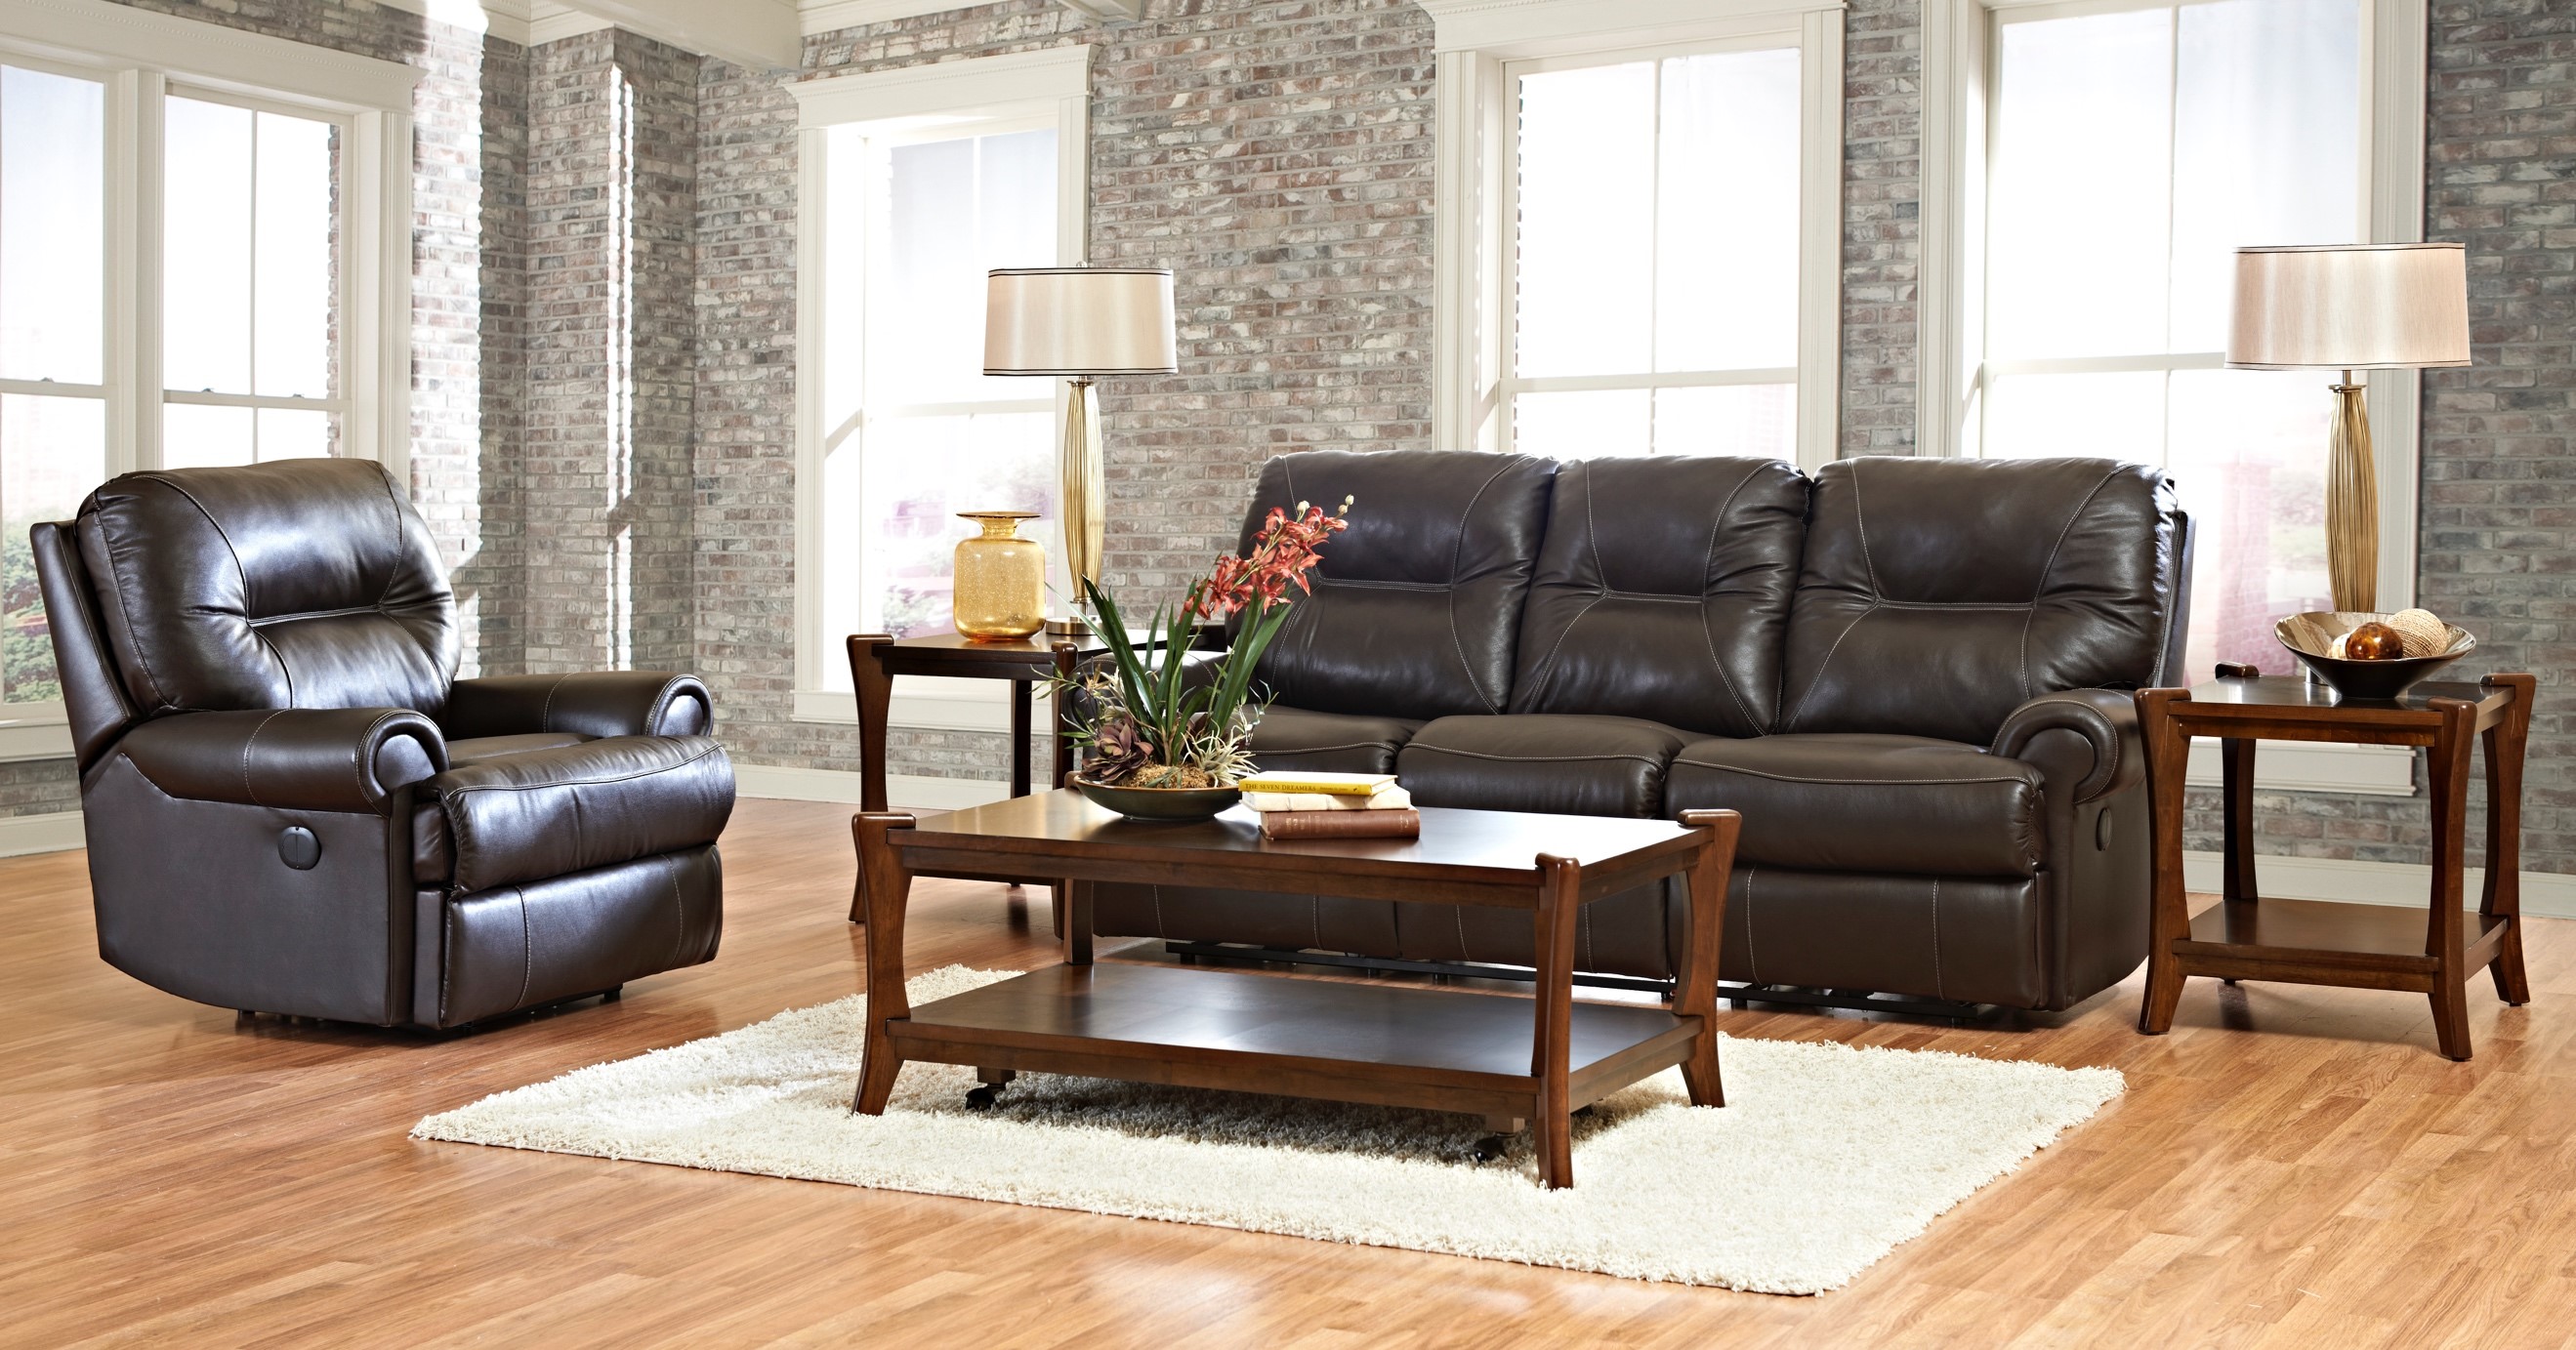 The Best Furniture For Your Living Room Interior Furniture Resources